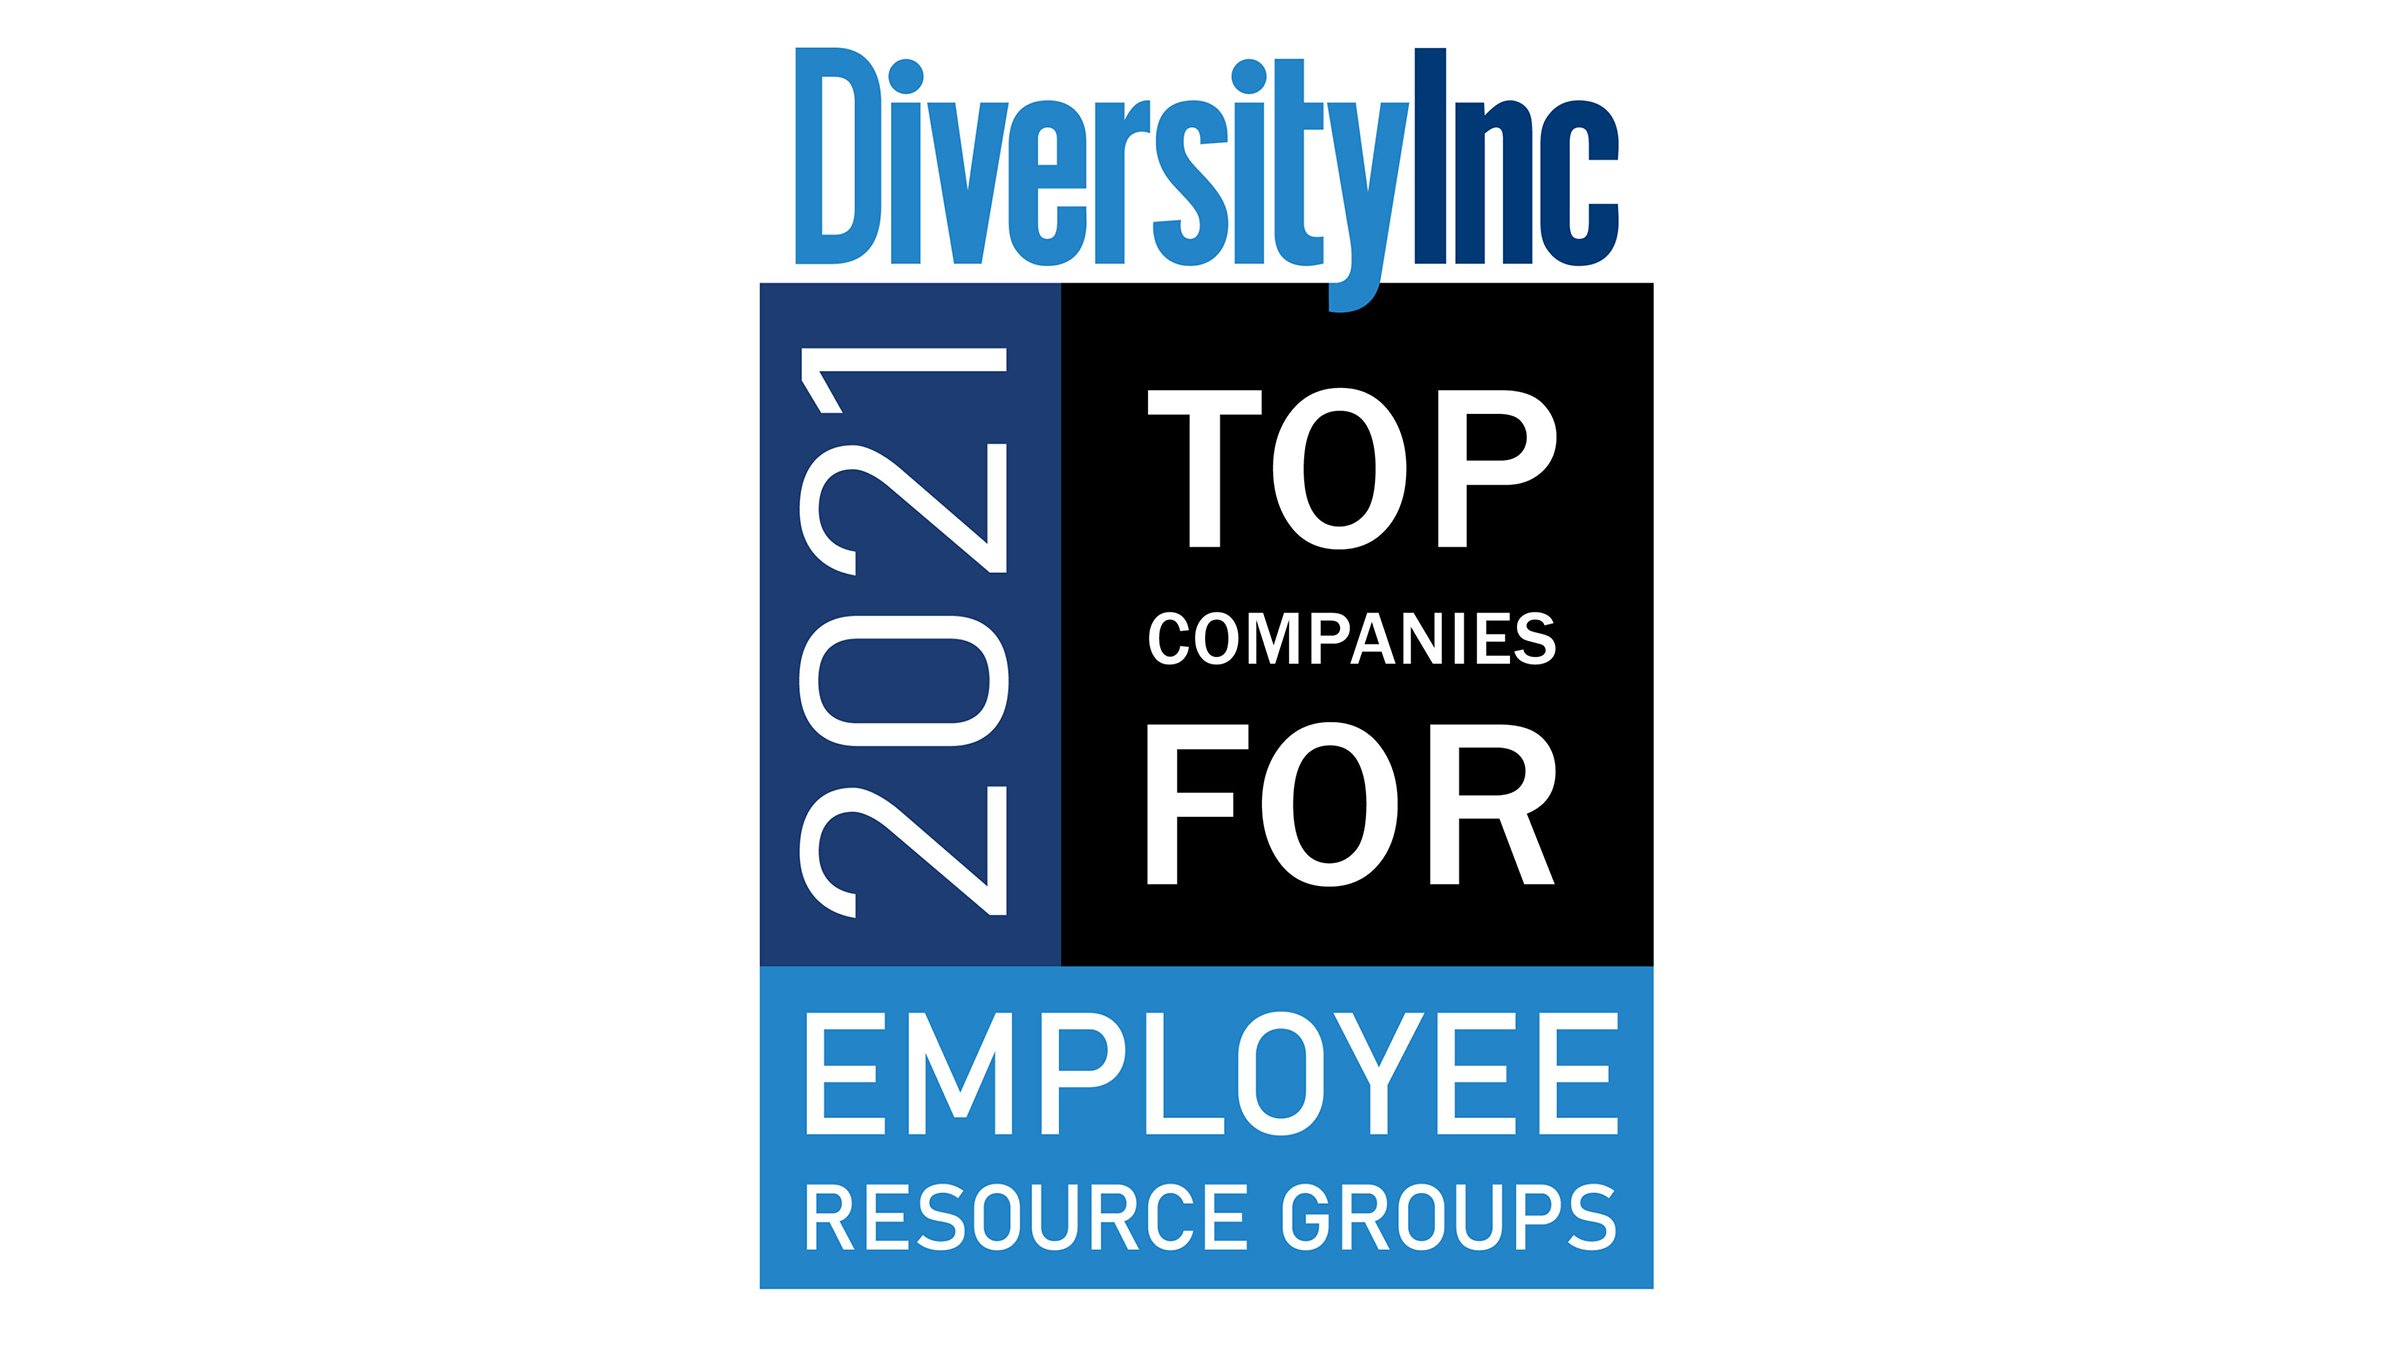 Diversity Inc Top Companies for Employee Resource Group